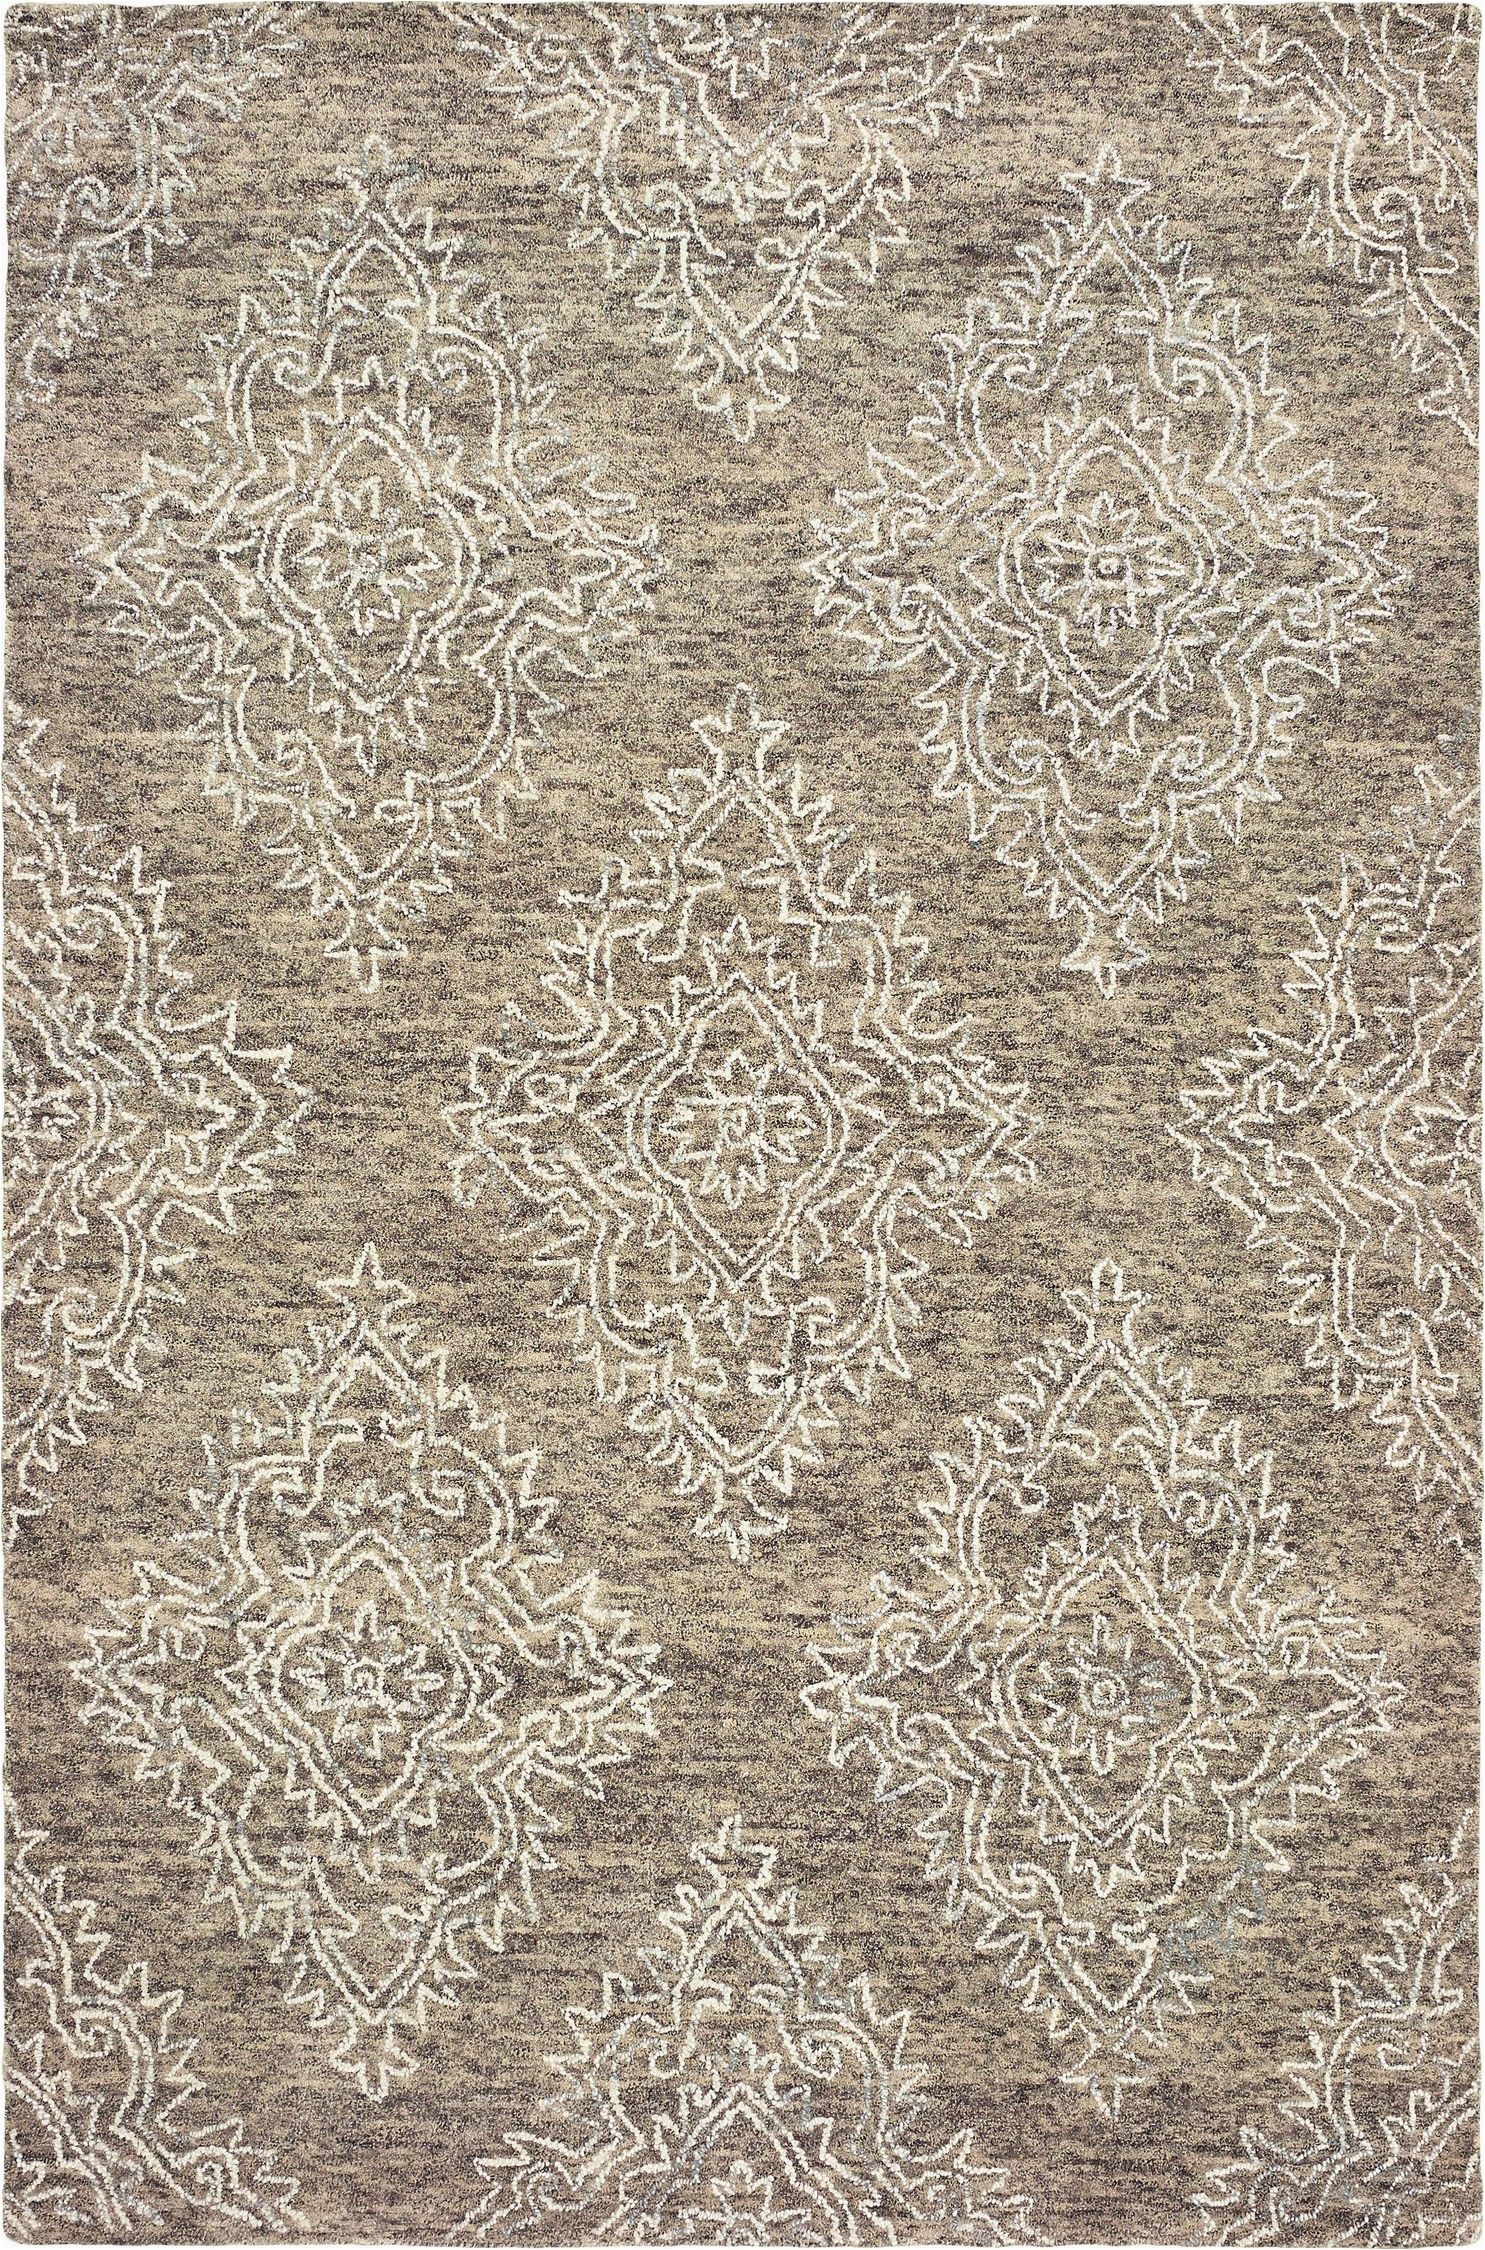 5ft by 7ft area Rug Lr Home Karma Floral Khaki 5 Ft X 7 Ft 9 In Indoor Tufted Wool area Rug Walmart